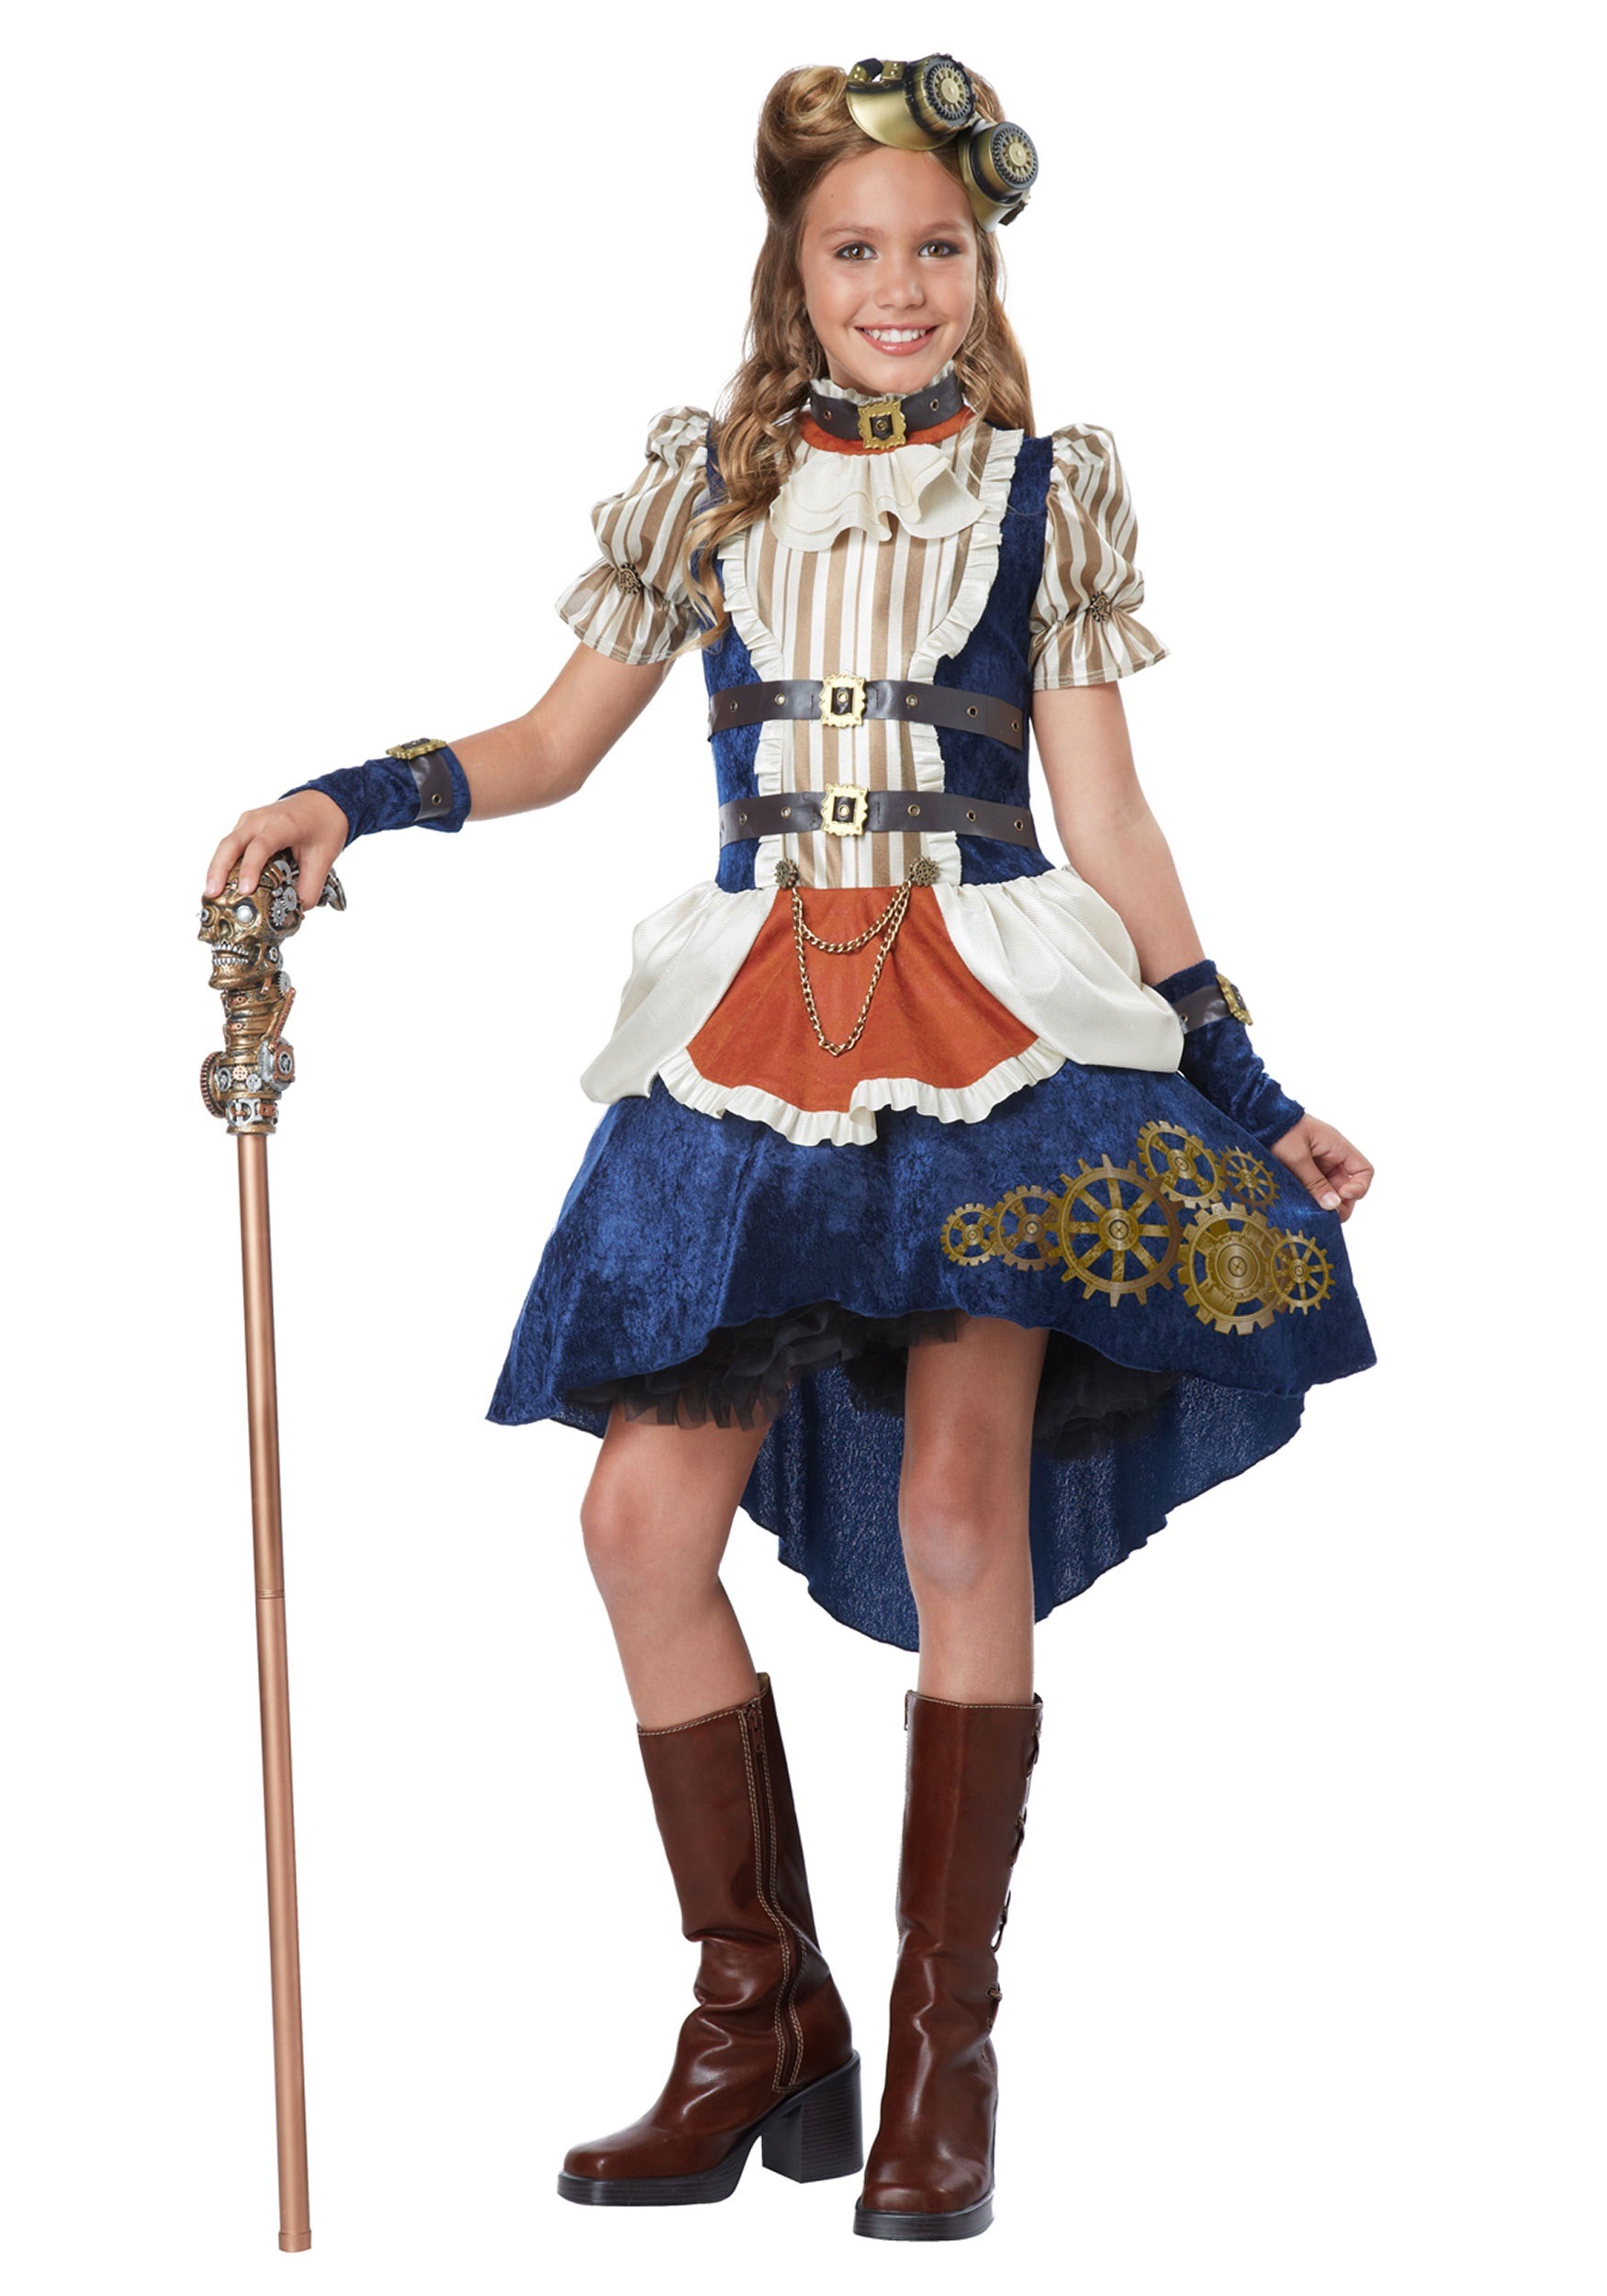 https://images.halloweencostumes.ca/products/39966/1-1/girls-steampunk-costume.jpg